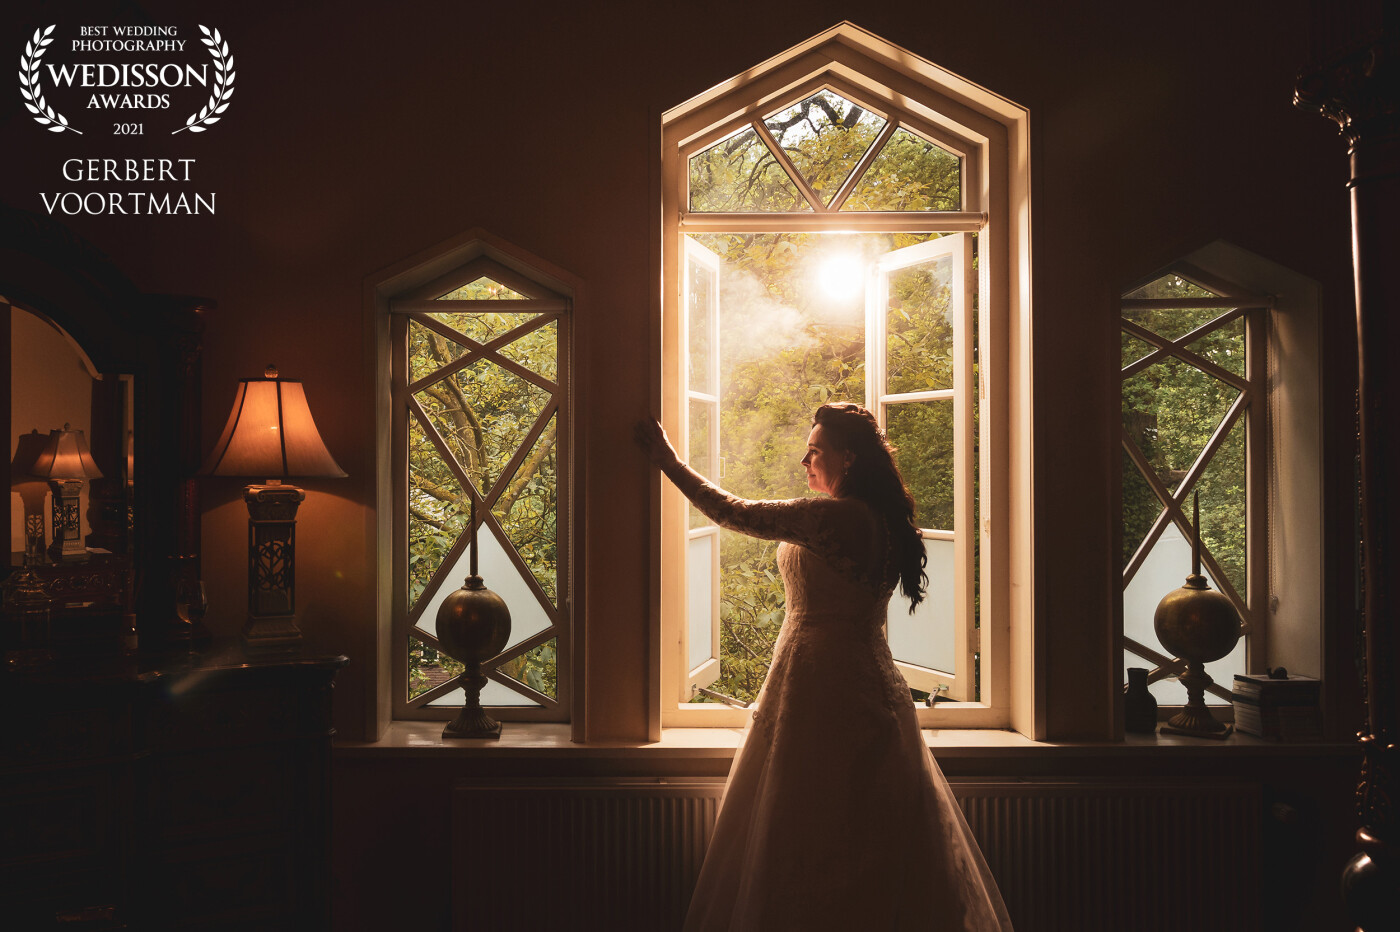 The bride at the bridalroom. A lovestory from the book. A lovely day and a great weddingshoot at the fantastic location at Huis de Voorst in Eefde Netherlands